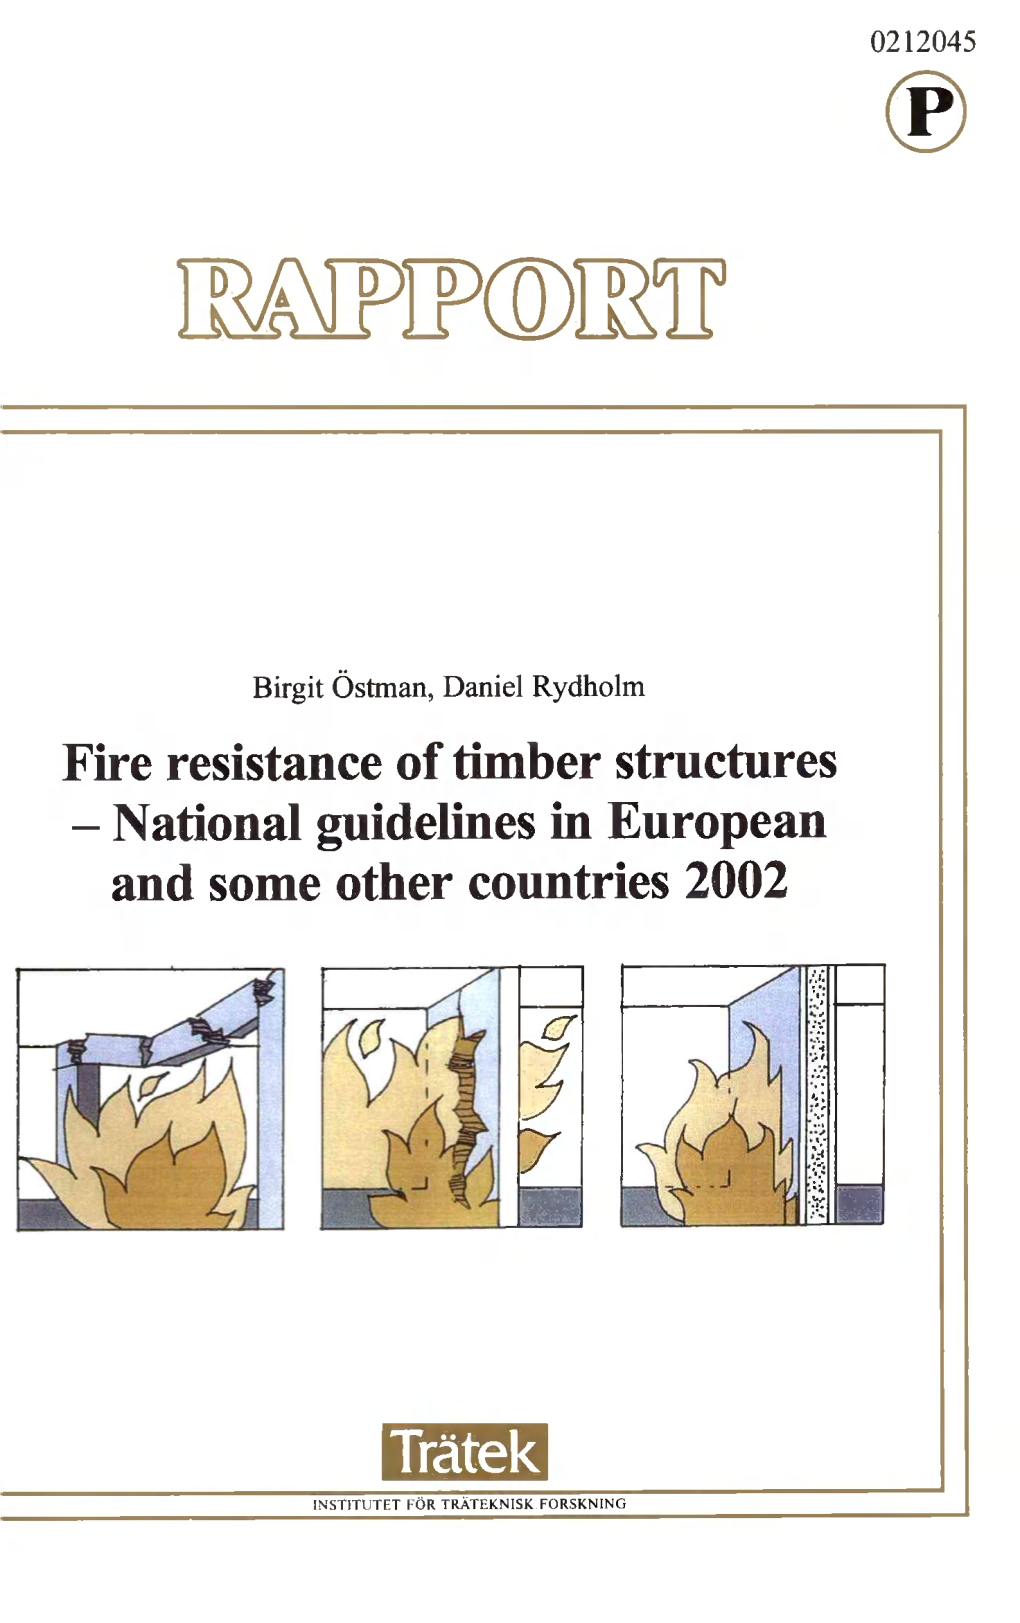 Fire Resistance of Timber Structures - National Guidelines in European and Some Otlier Countries 2002